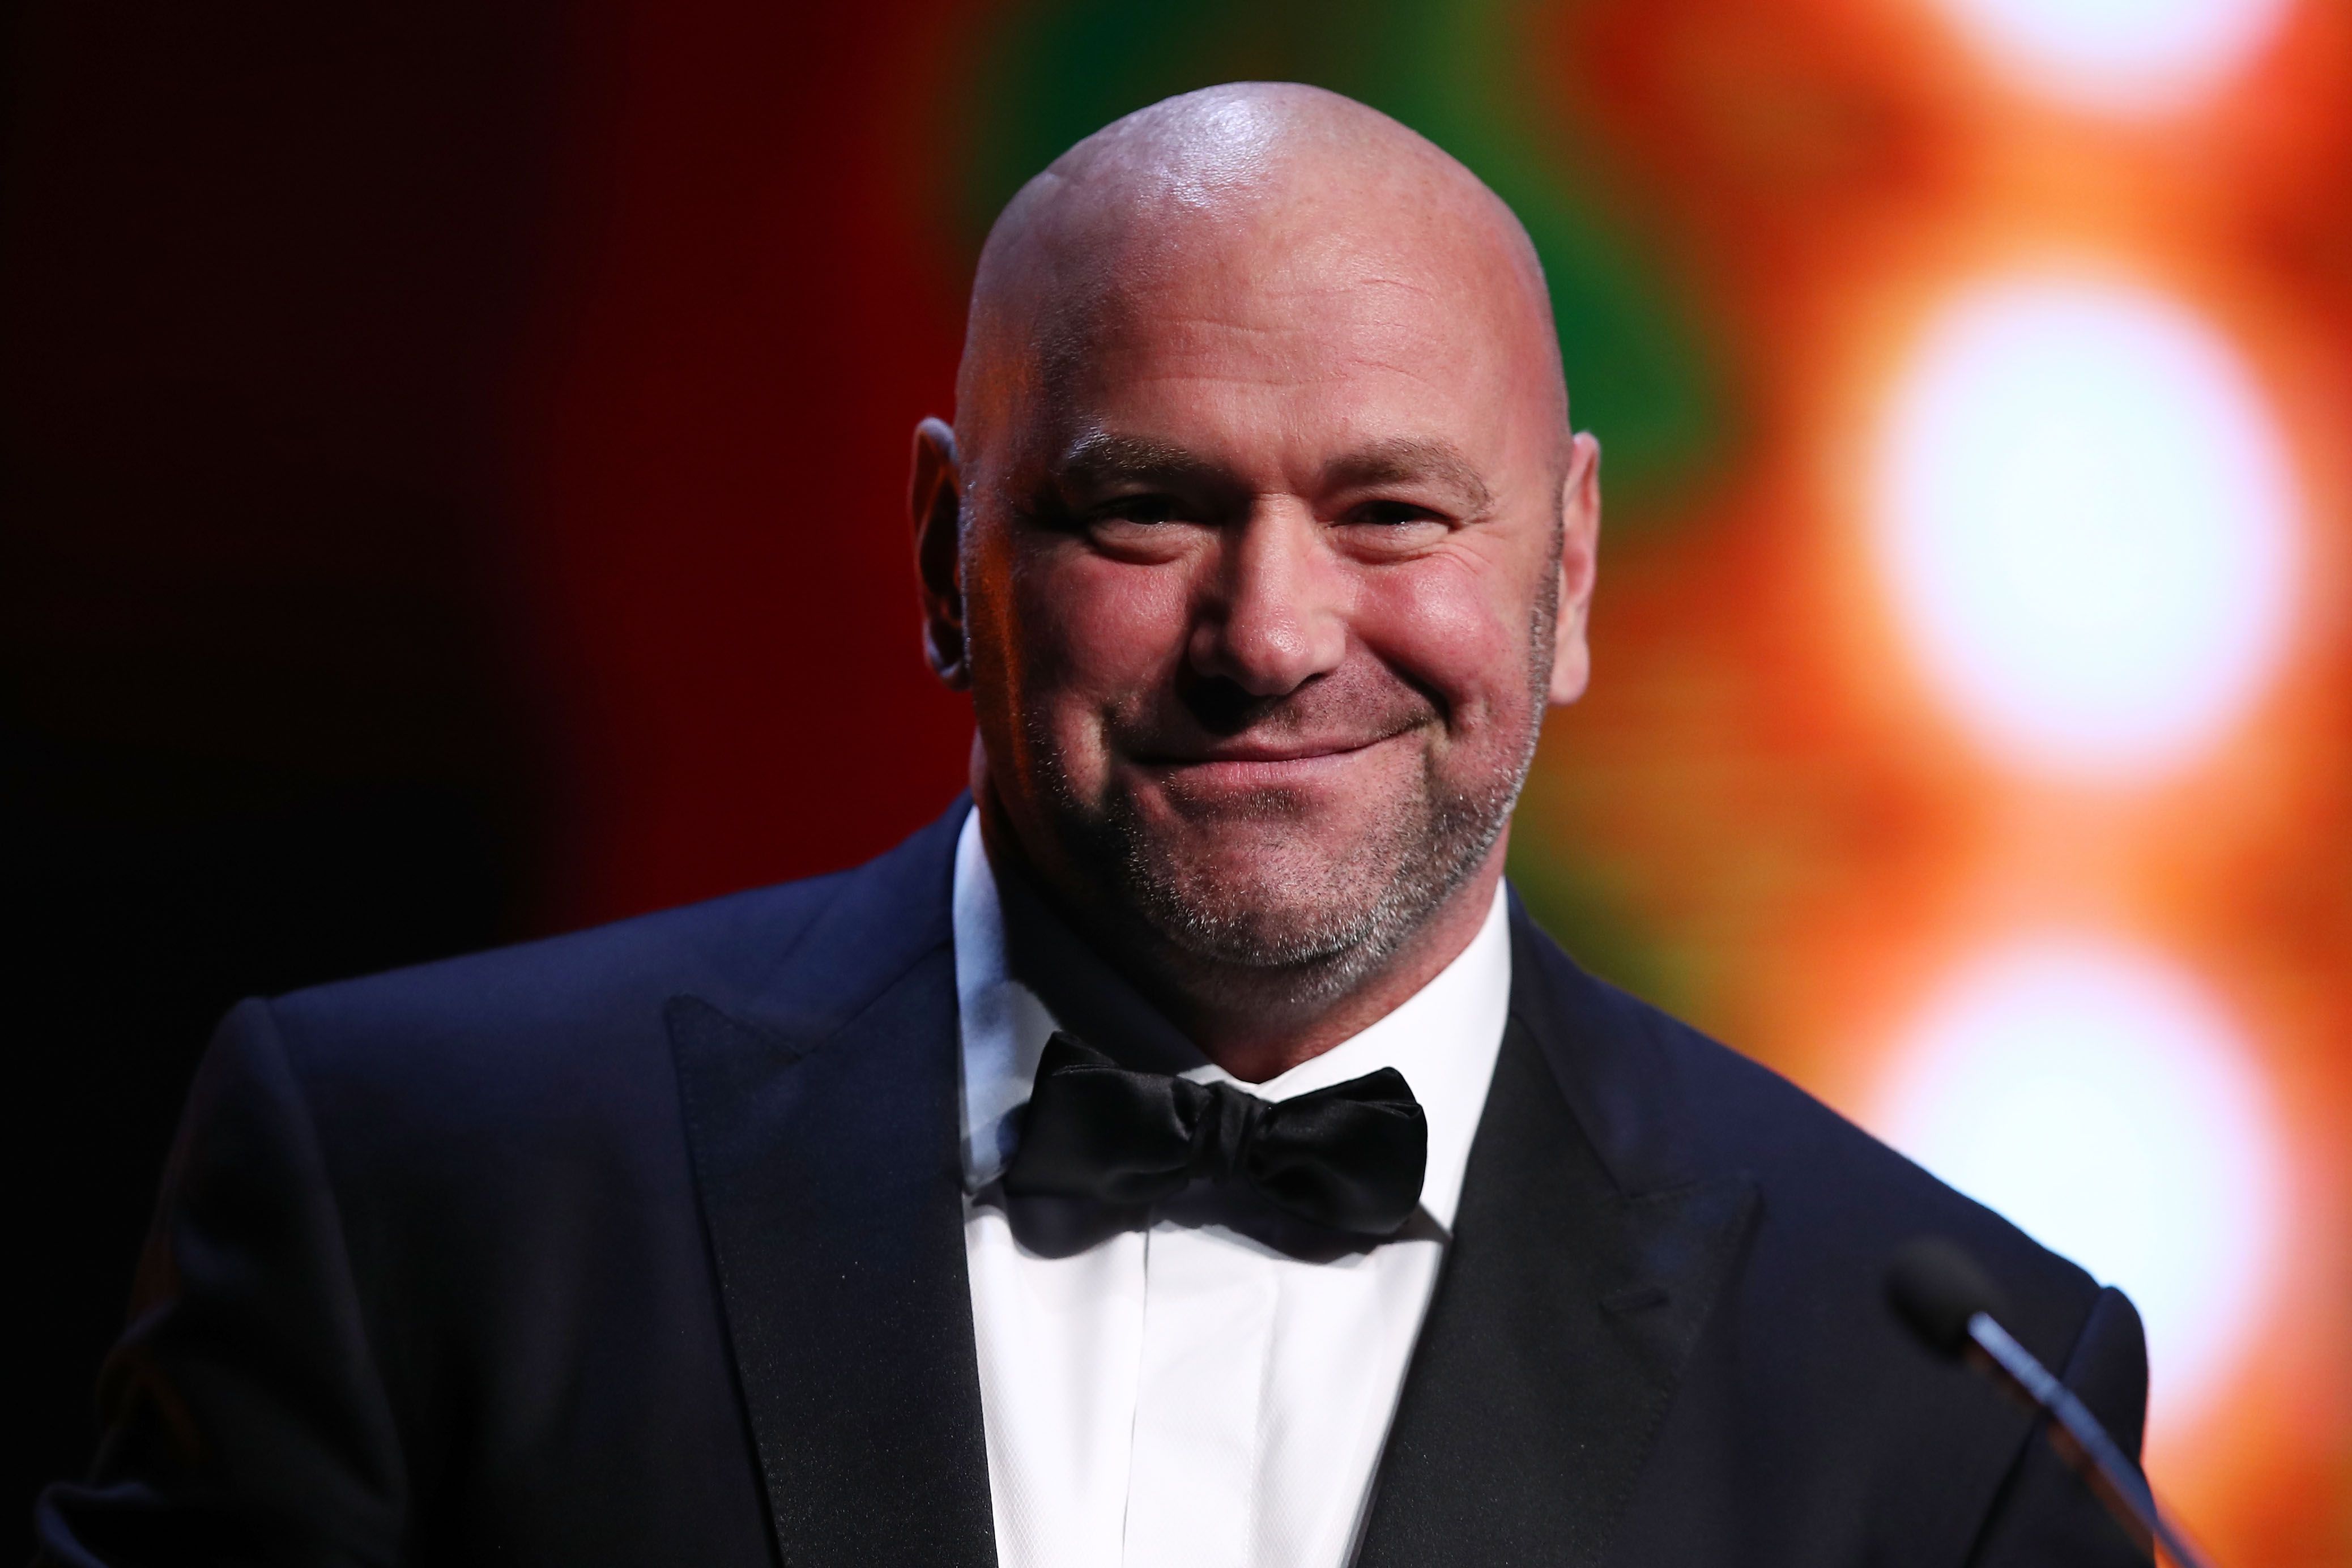 SYDNEY, AUSTRALIA - NOVEMBER 14:  Dana White presents the Sportsman of The Year award during the GQ Australia Men of The Year Awards Ceremony at The Star on November 14, 2018 in Sydney, Australia.  (Photo by Ryan Pierse/Getty Images for GQ Australia) BT Sport